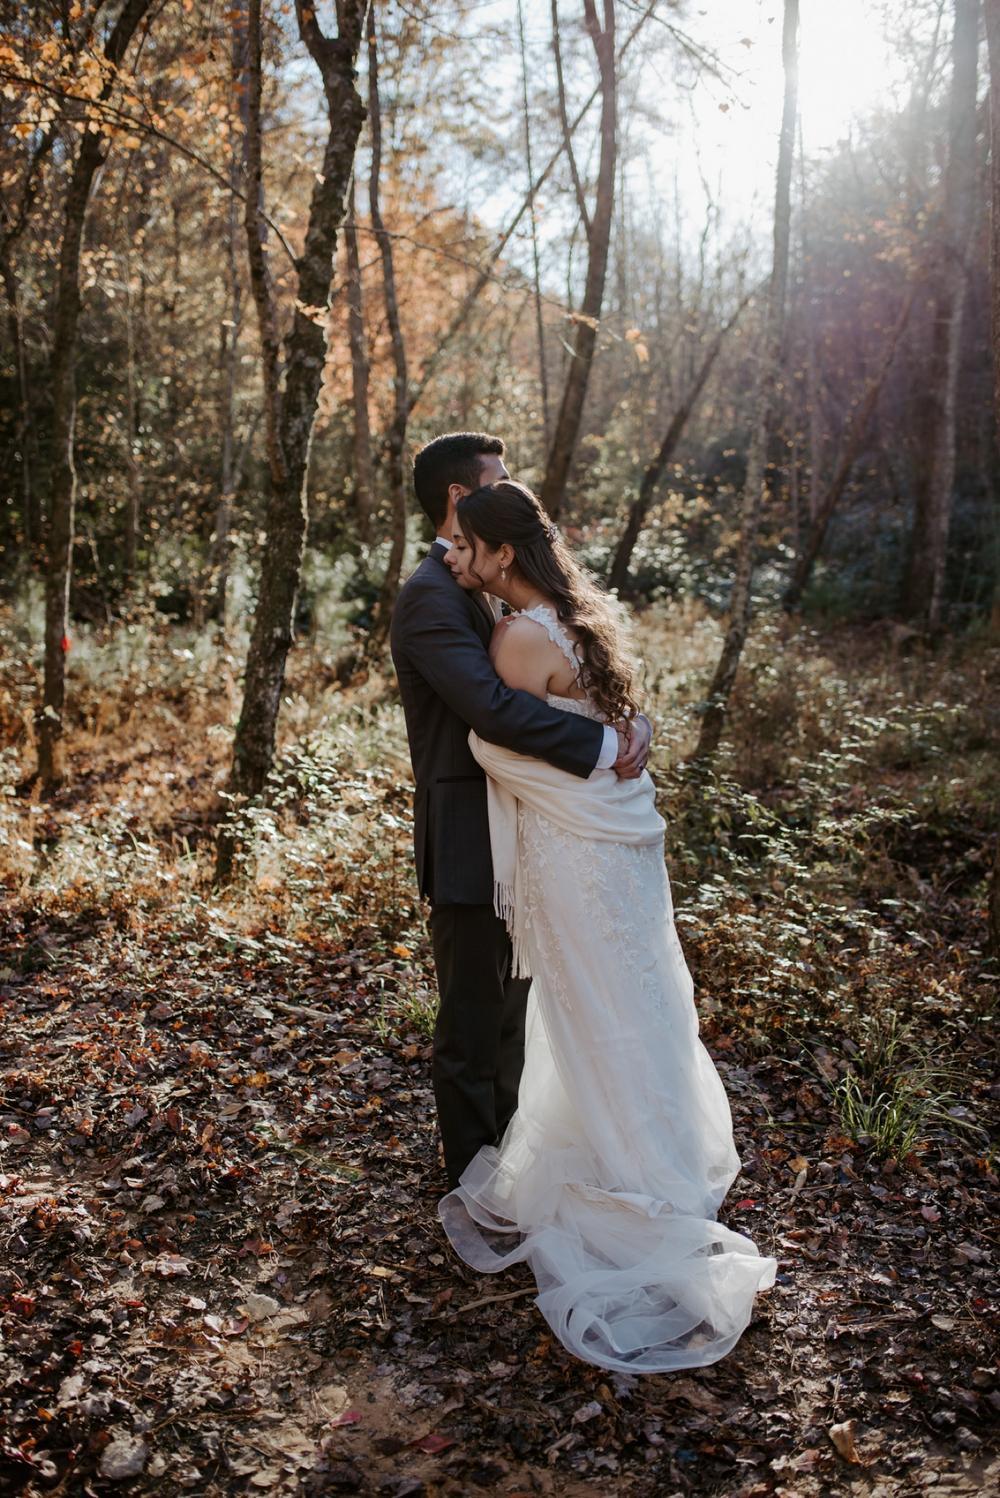 Wedding Photos in the Forest